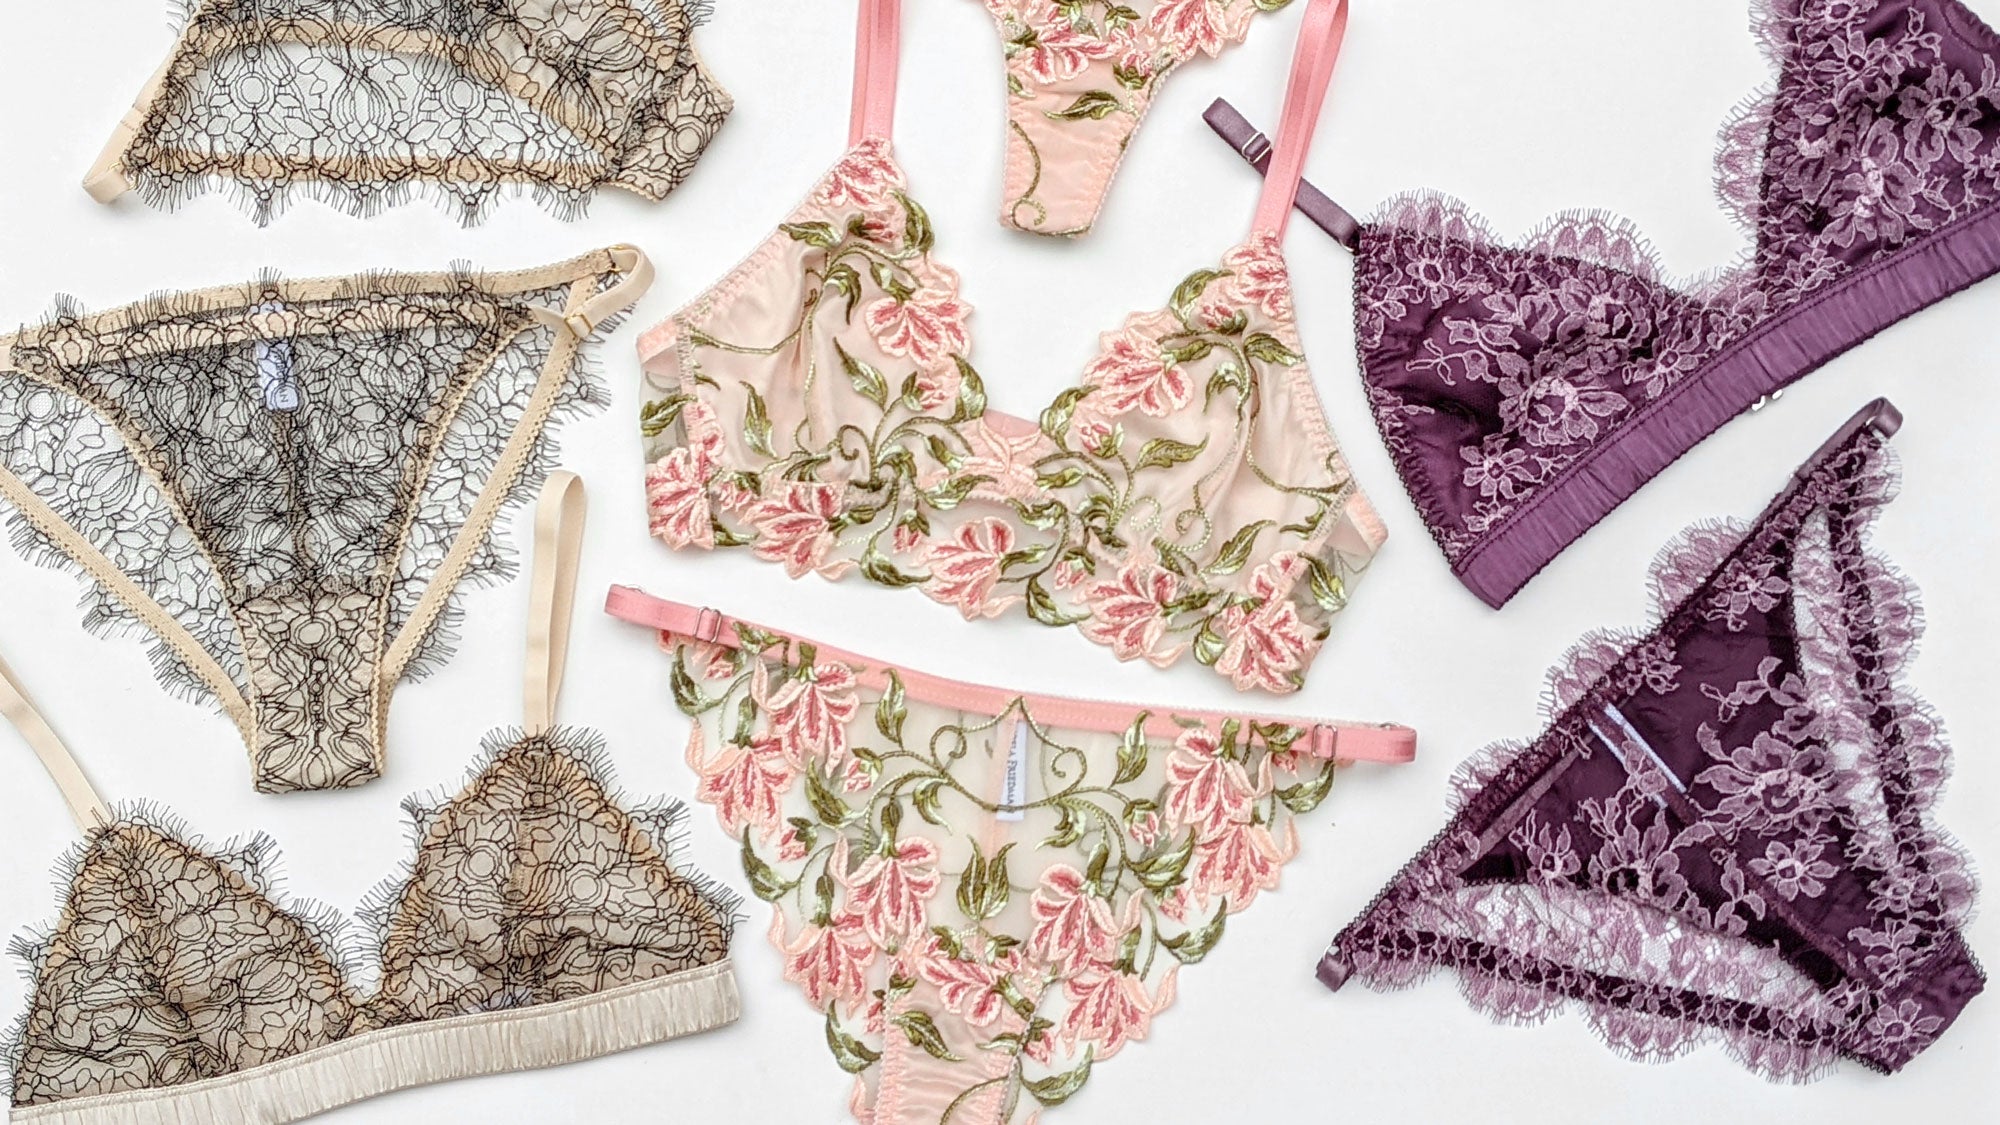 How to start collecting luxury lingerie